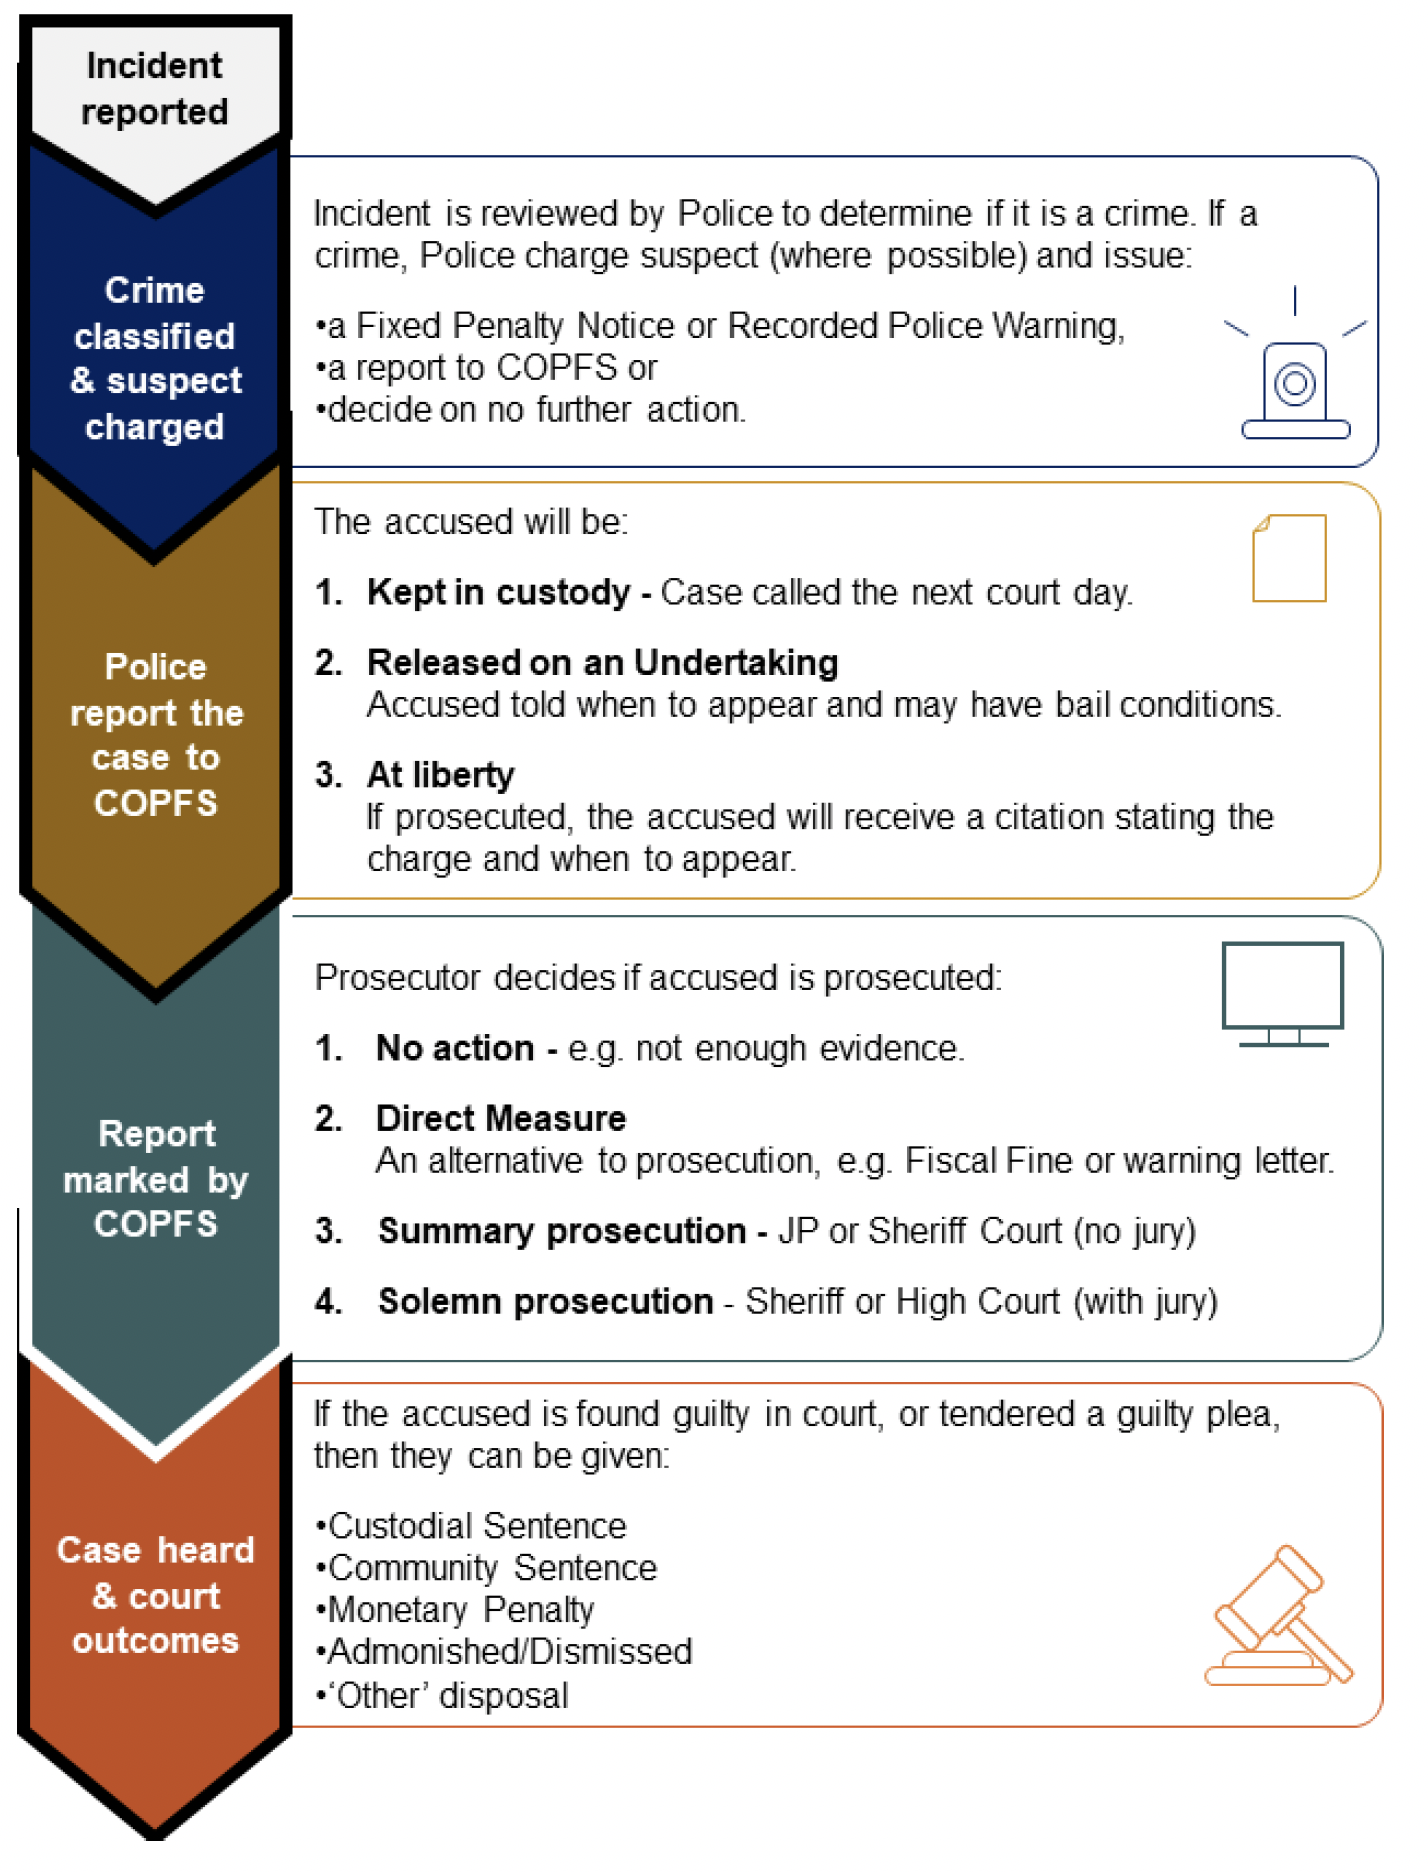 A flow chart to illustrate the justice process, from an incident being reported through to a case being conducted in court.